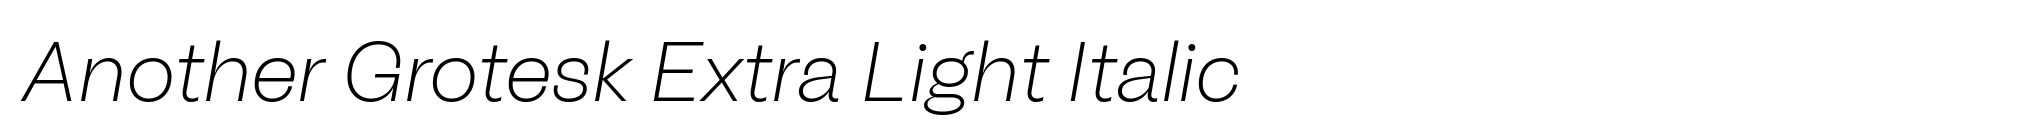 Another Grotesk Extra Light Italic image